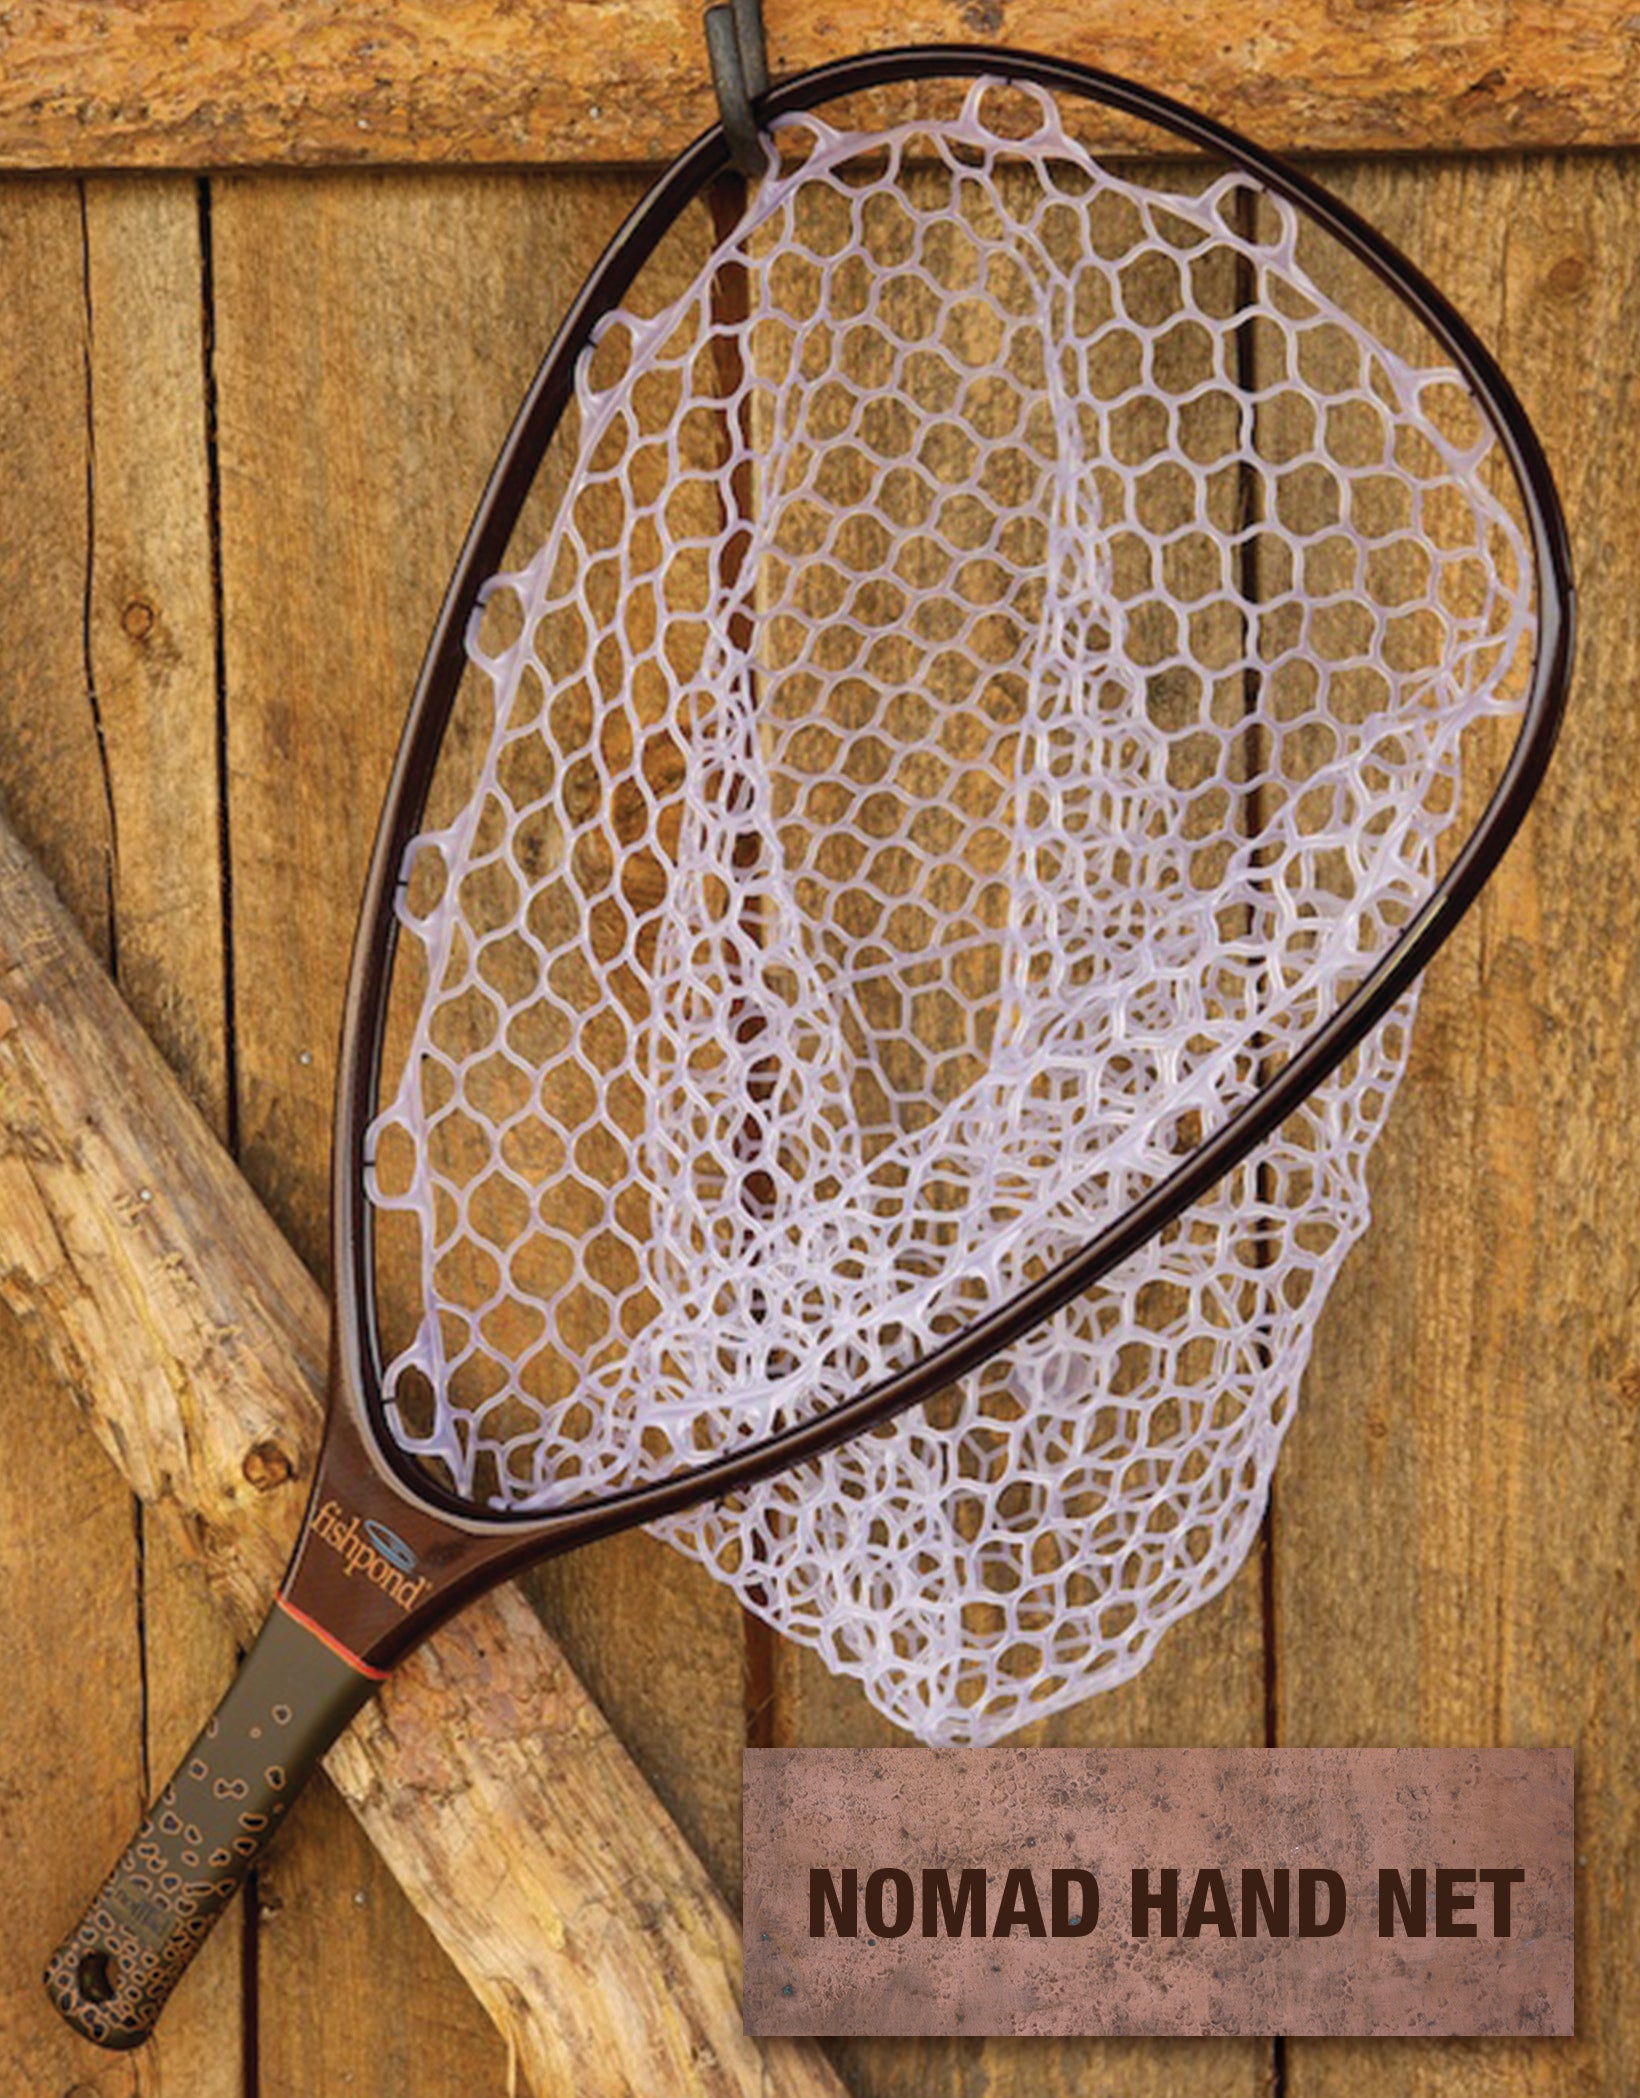 Fishpond Nomad Hand Net Tailwater Image 04